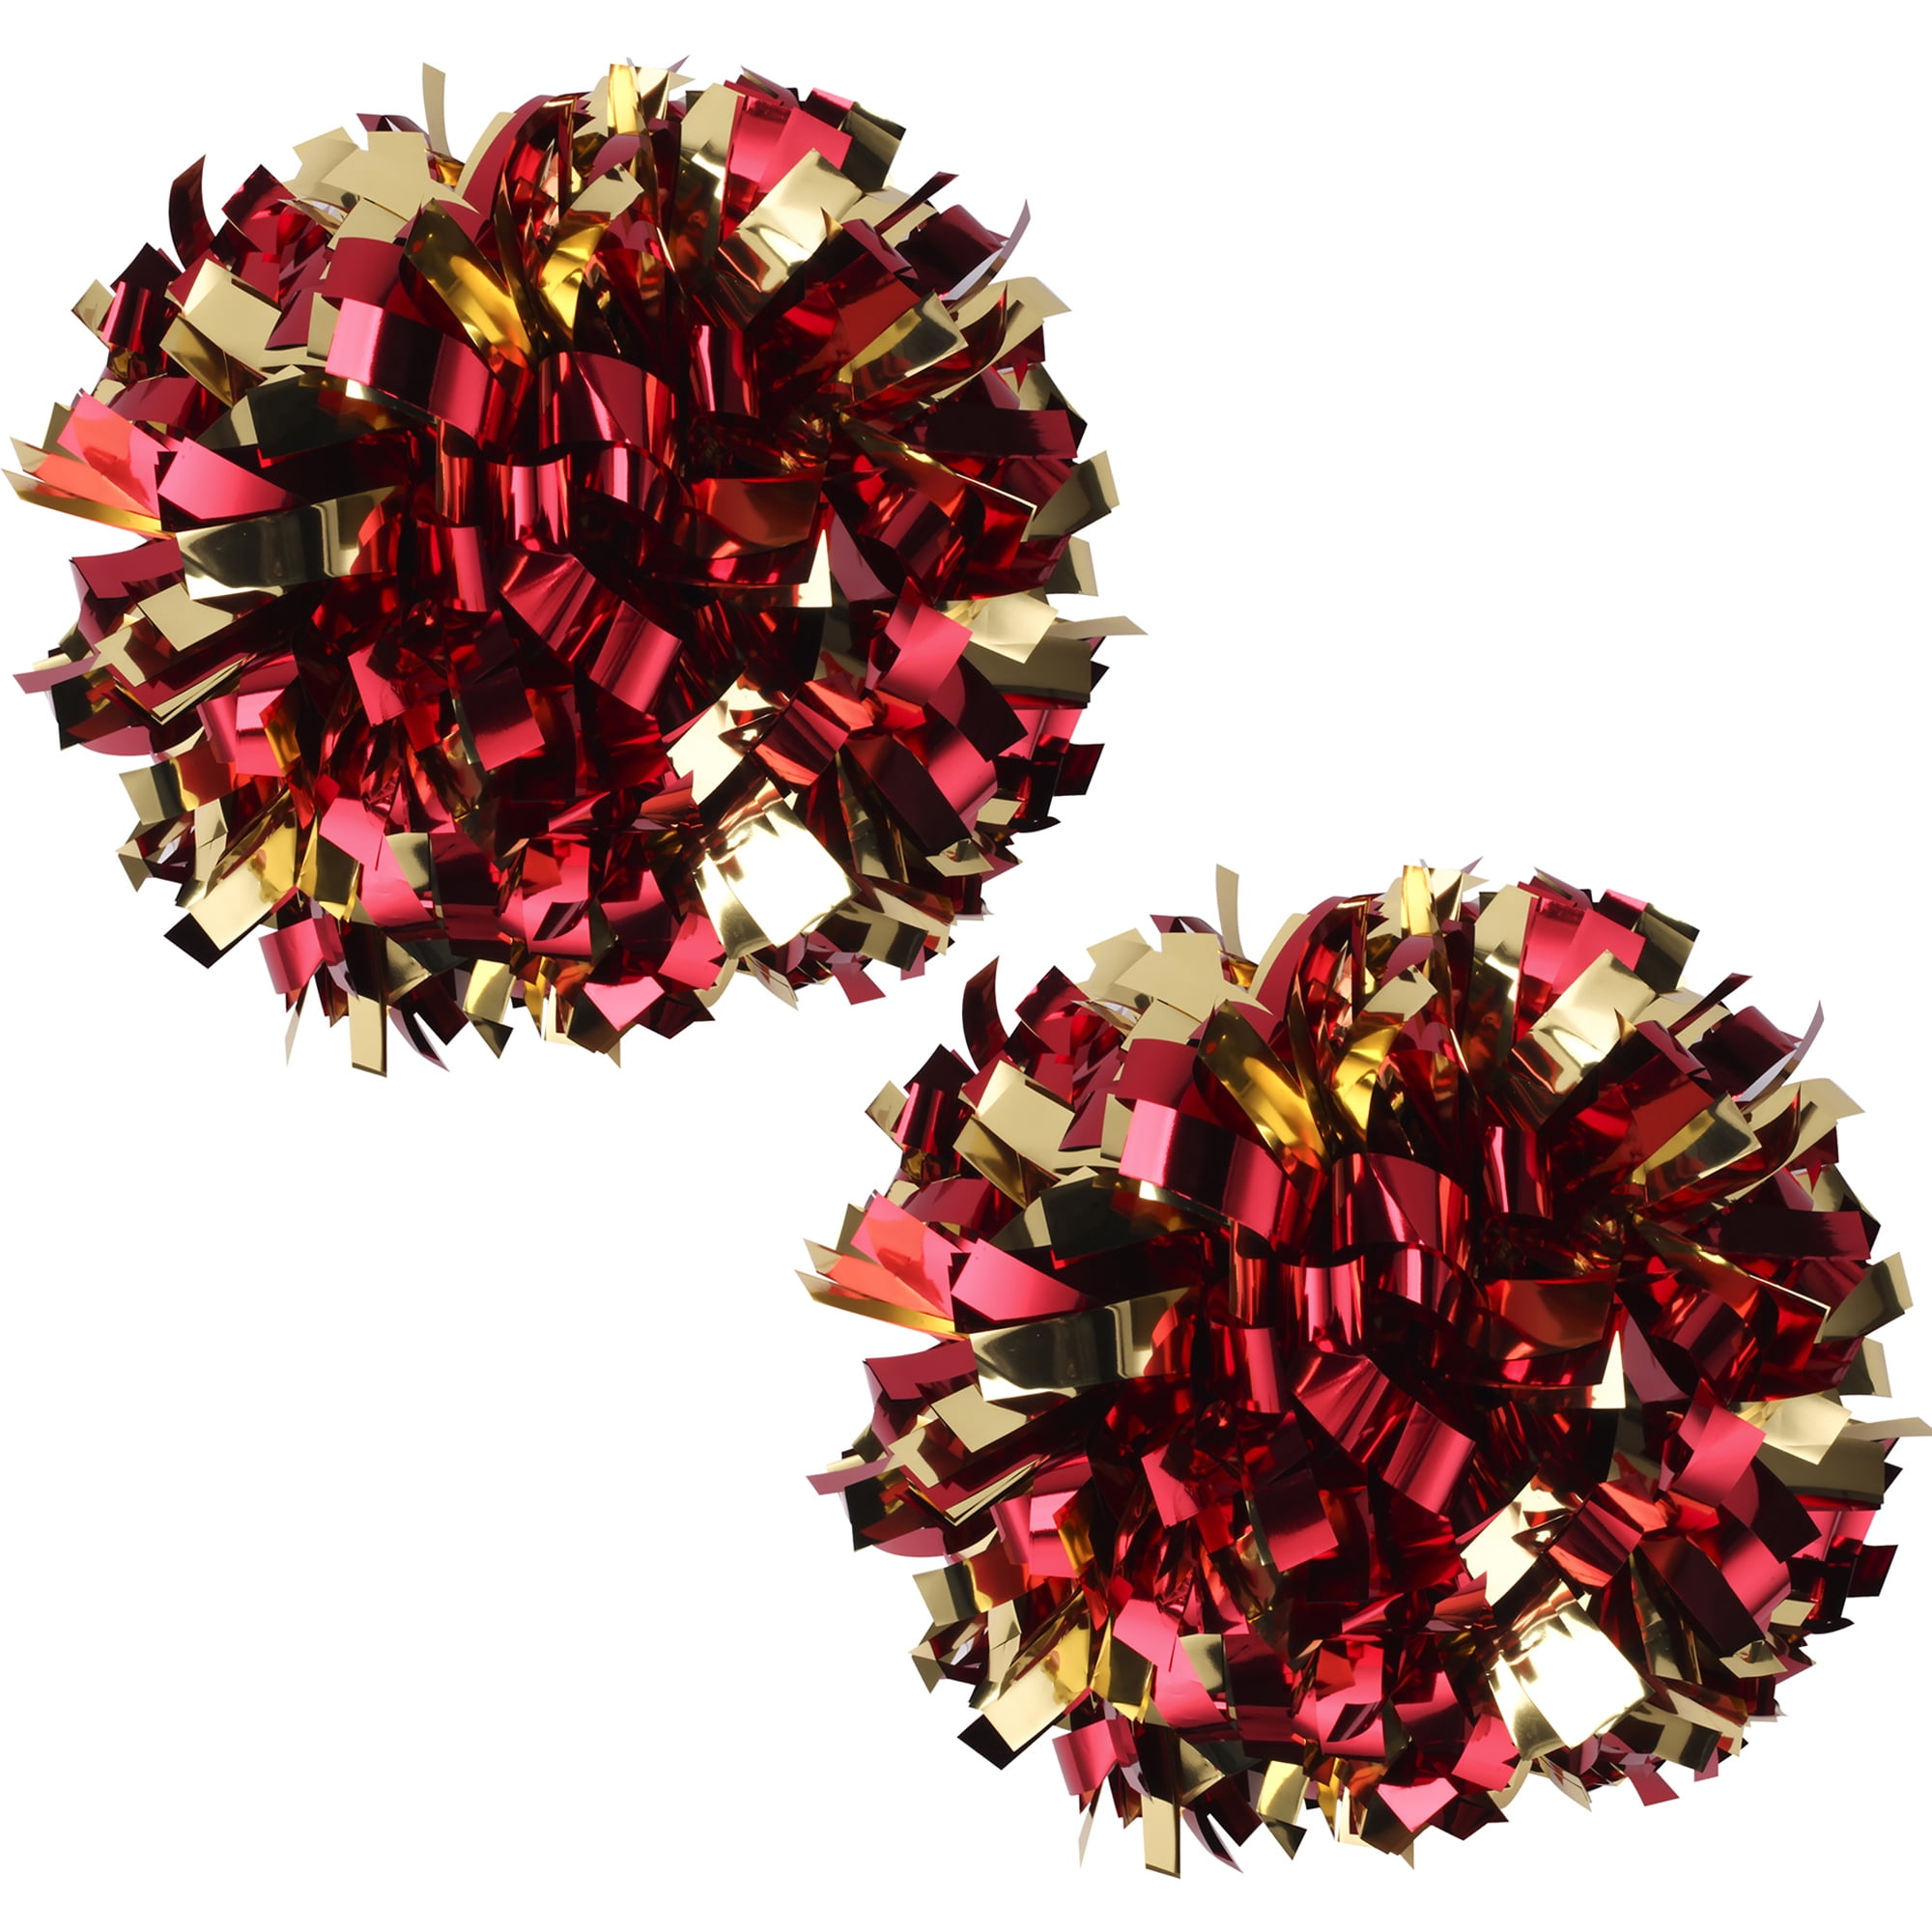 Multi Purpose Pom Poms Red or Black Cheerleading or Party Gear 